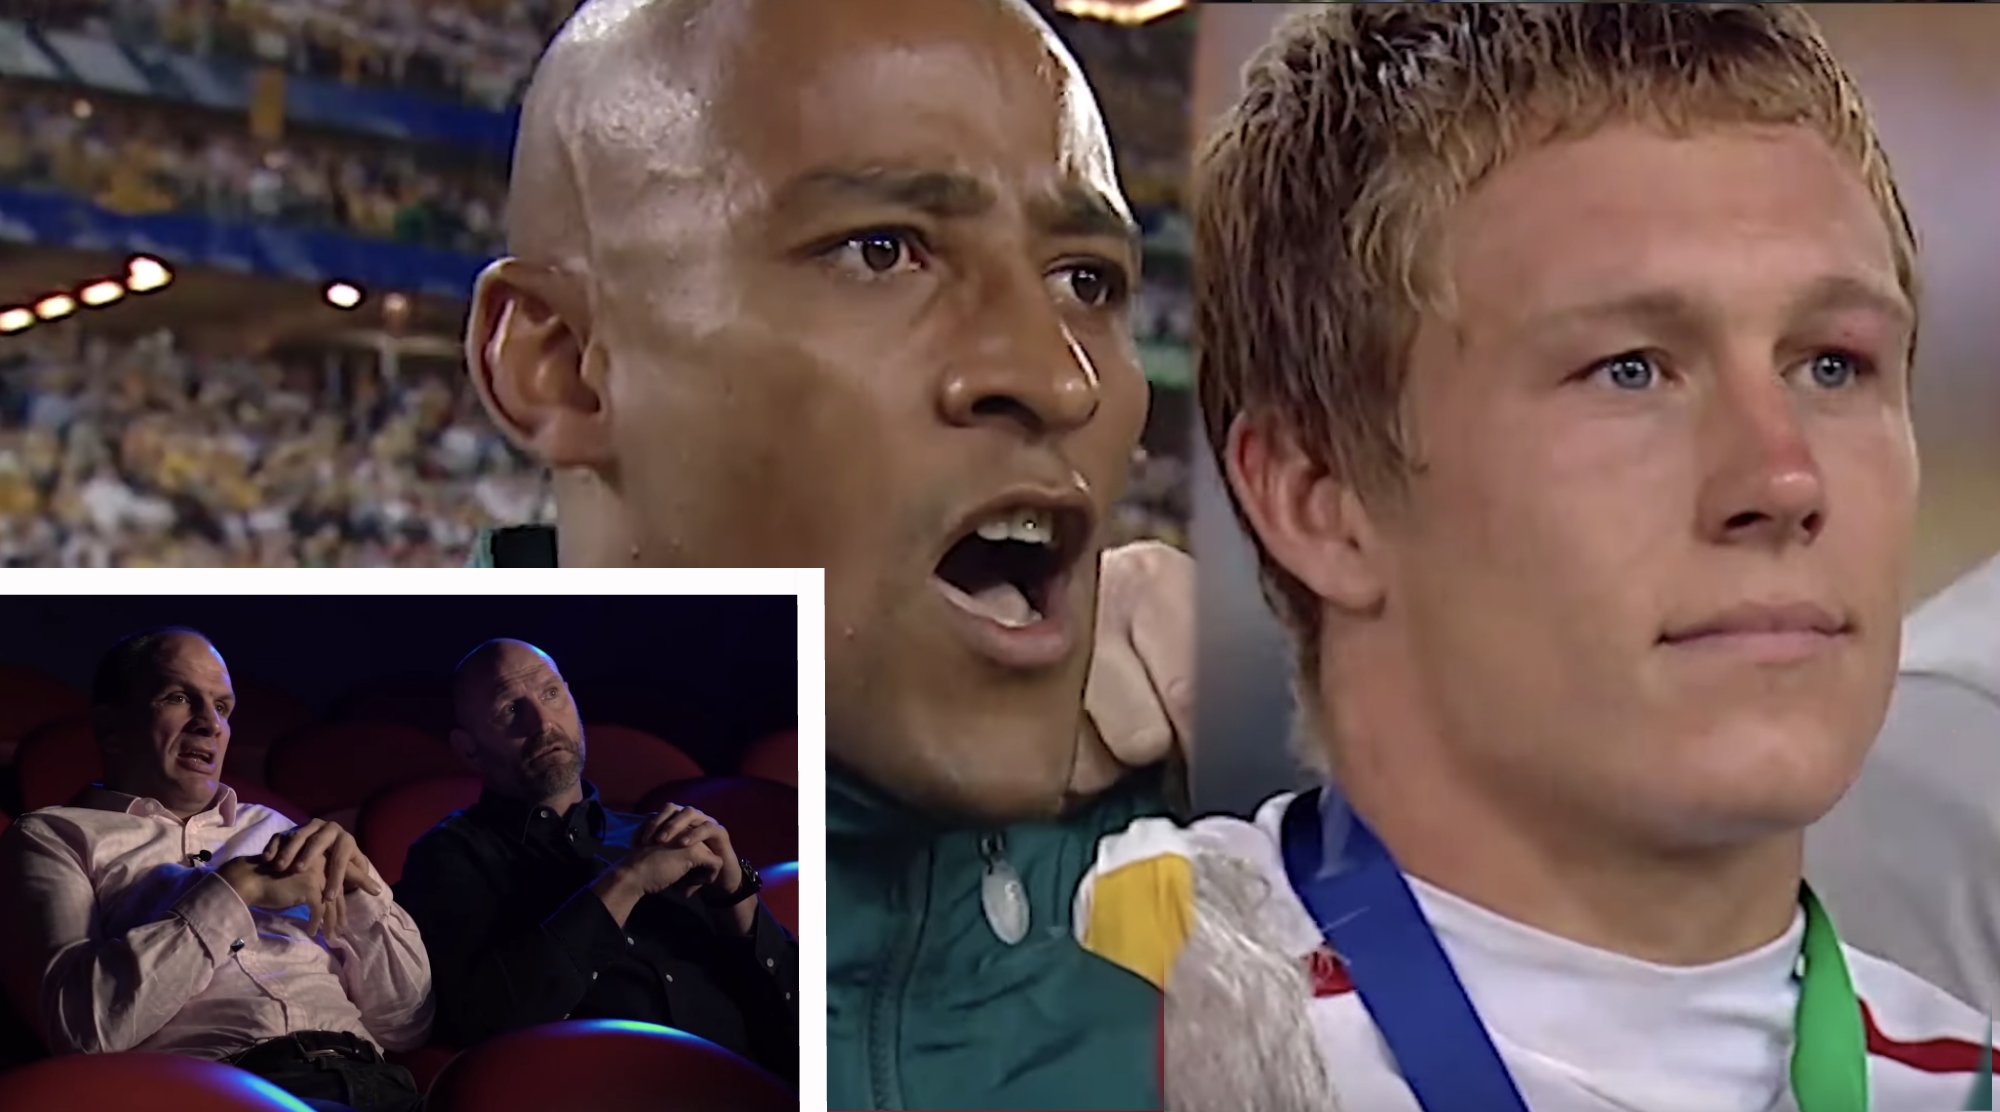 The entirety of the 2003 World Cup final has been published online